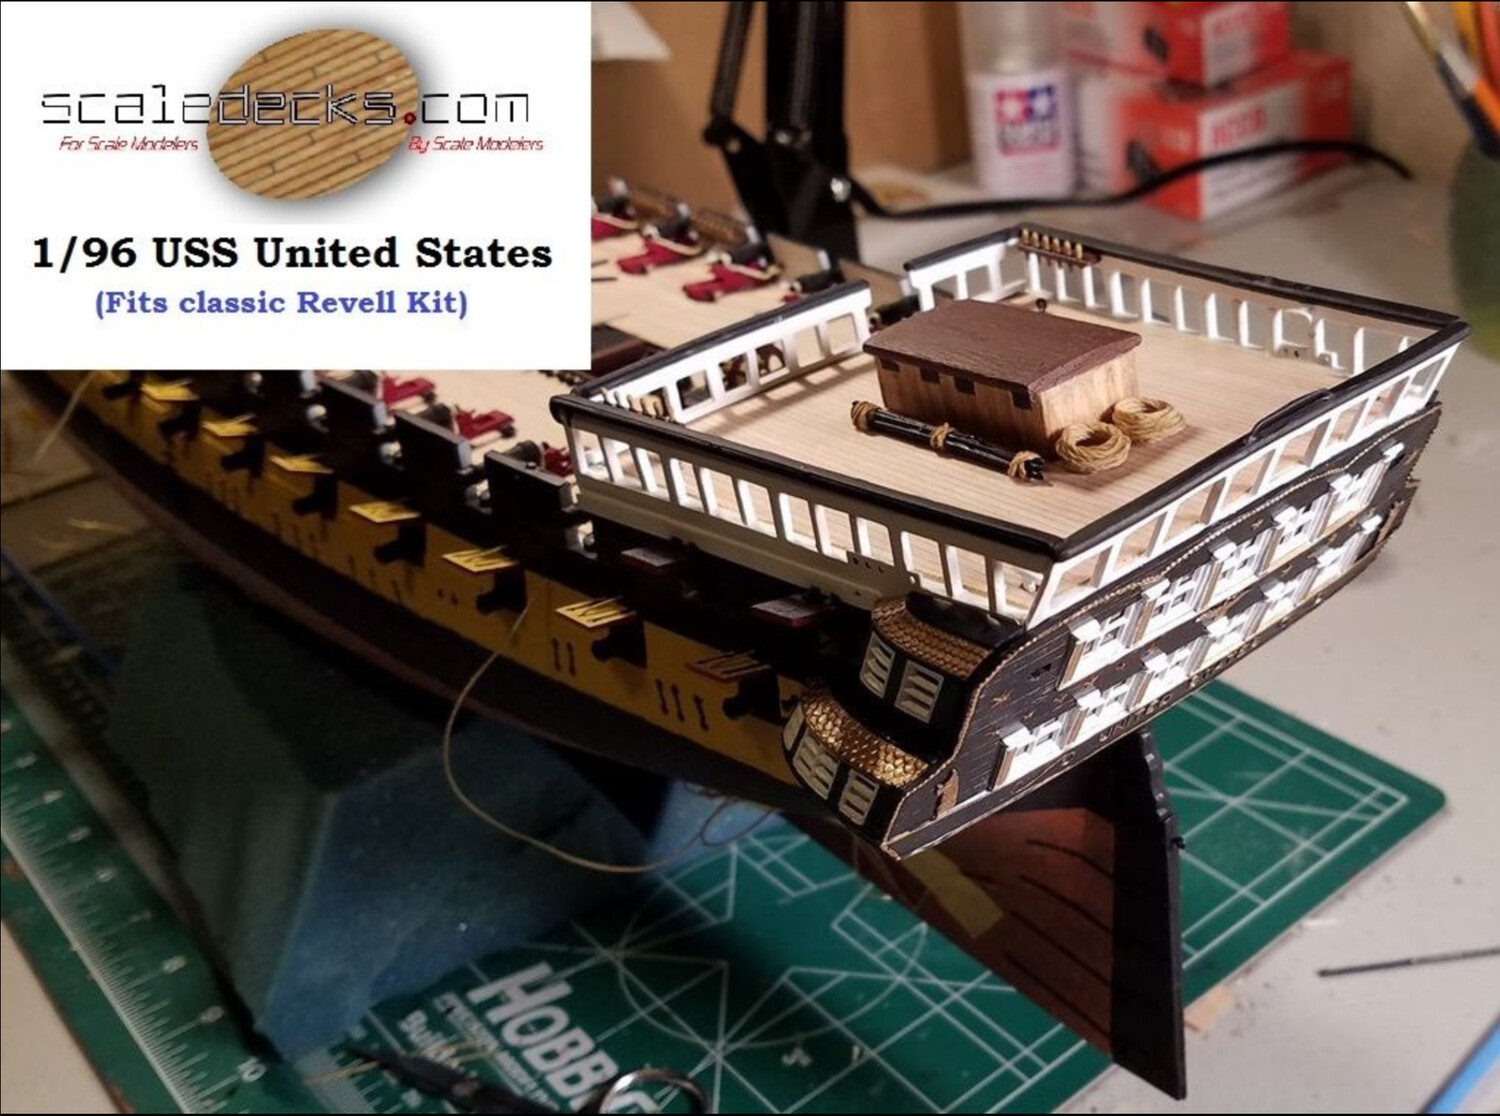 LCD-12 Wood Deck for 1/96 USS United States by Scaledecks fits Revell kit 